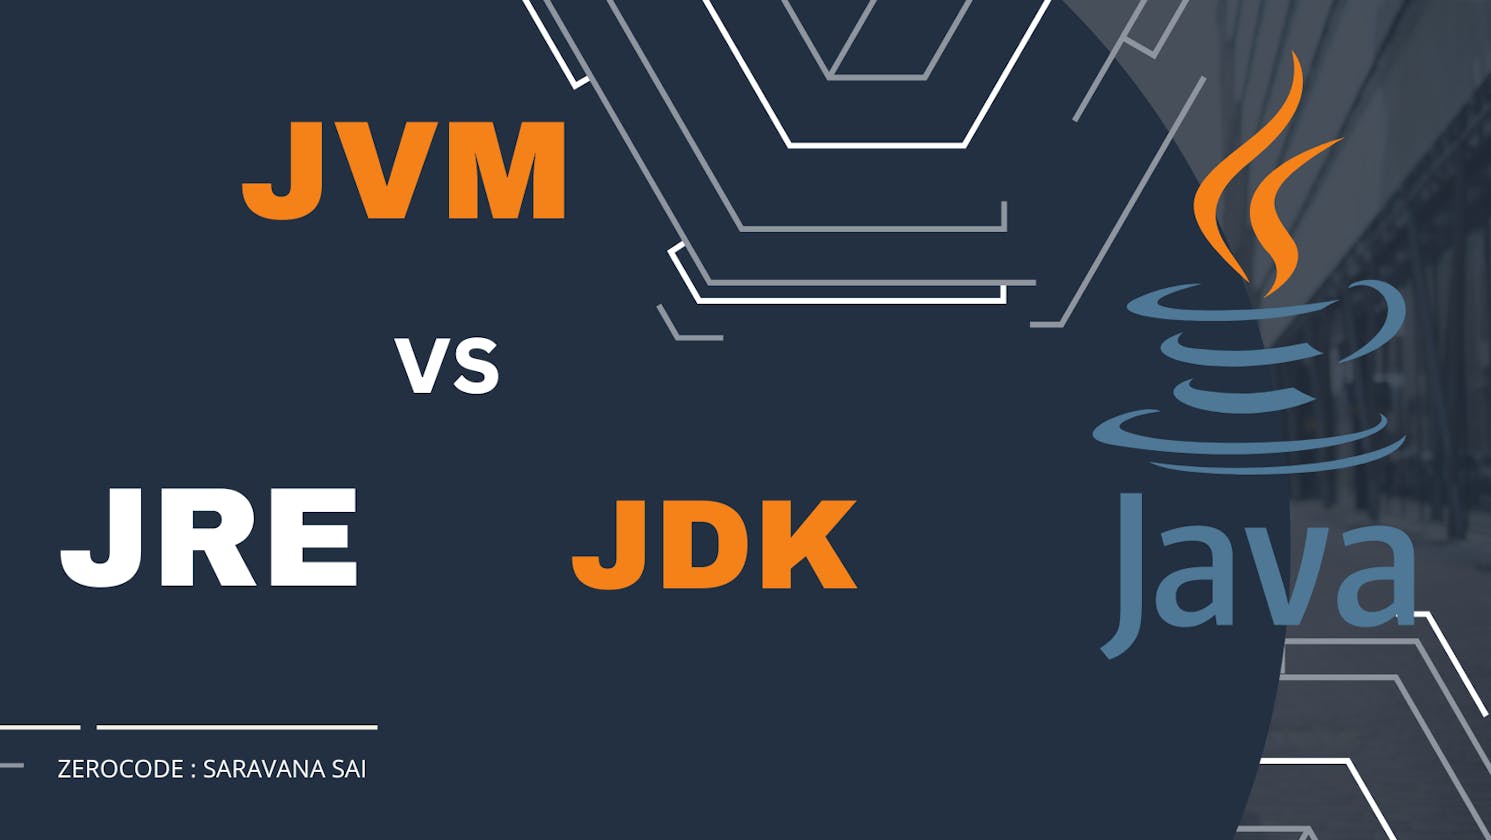 JDK vs JRE vs JVM in Java – Difference Between Them